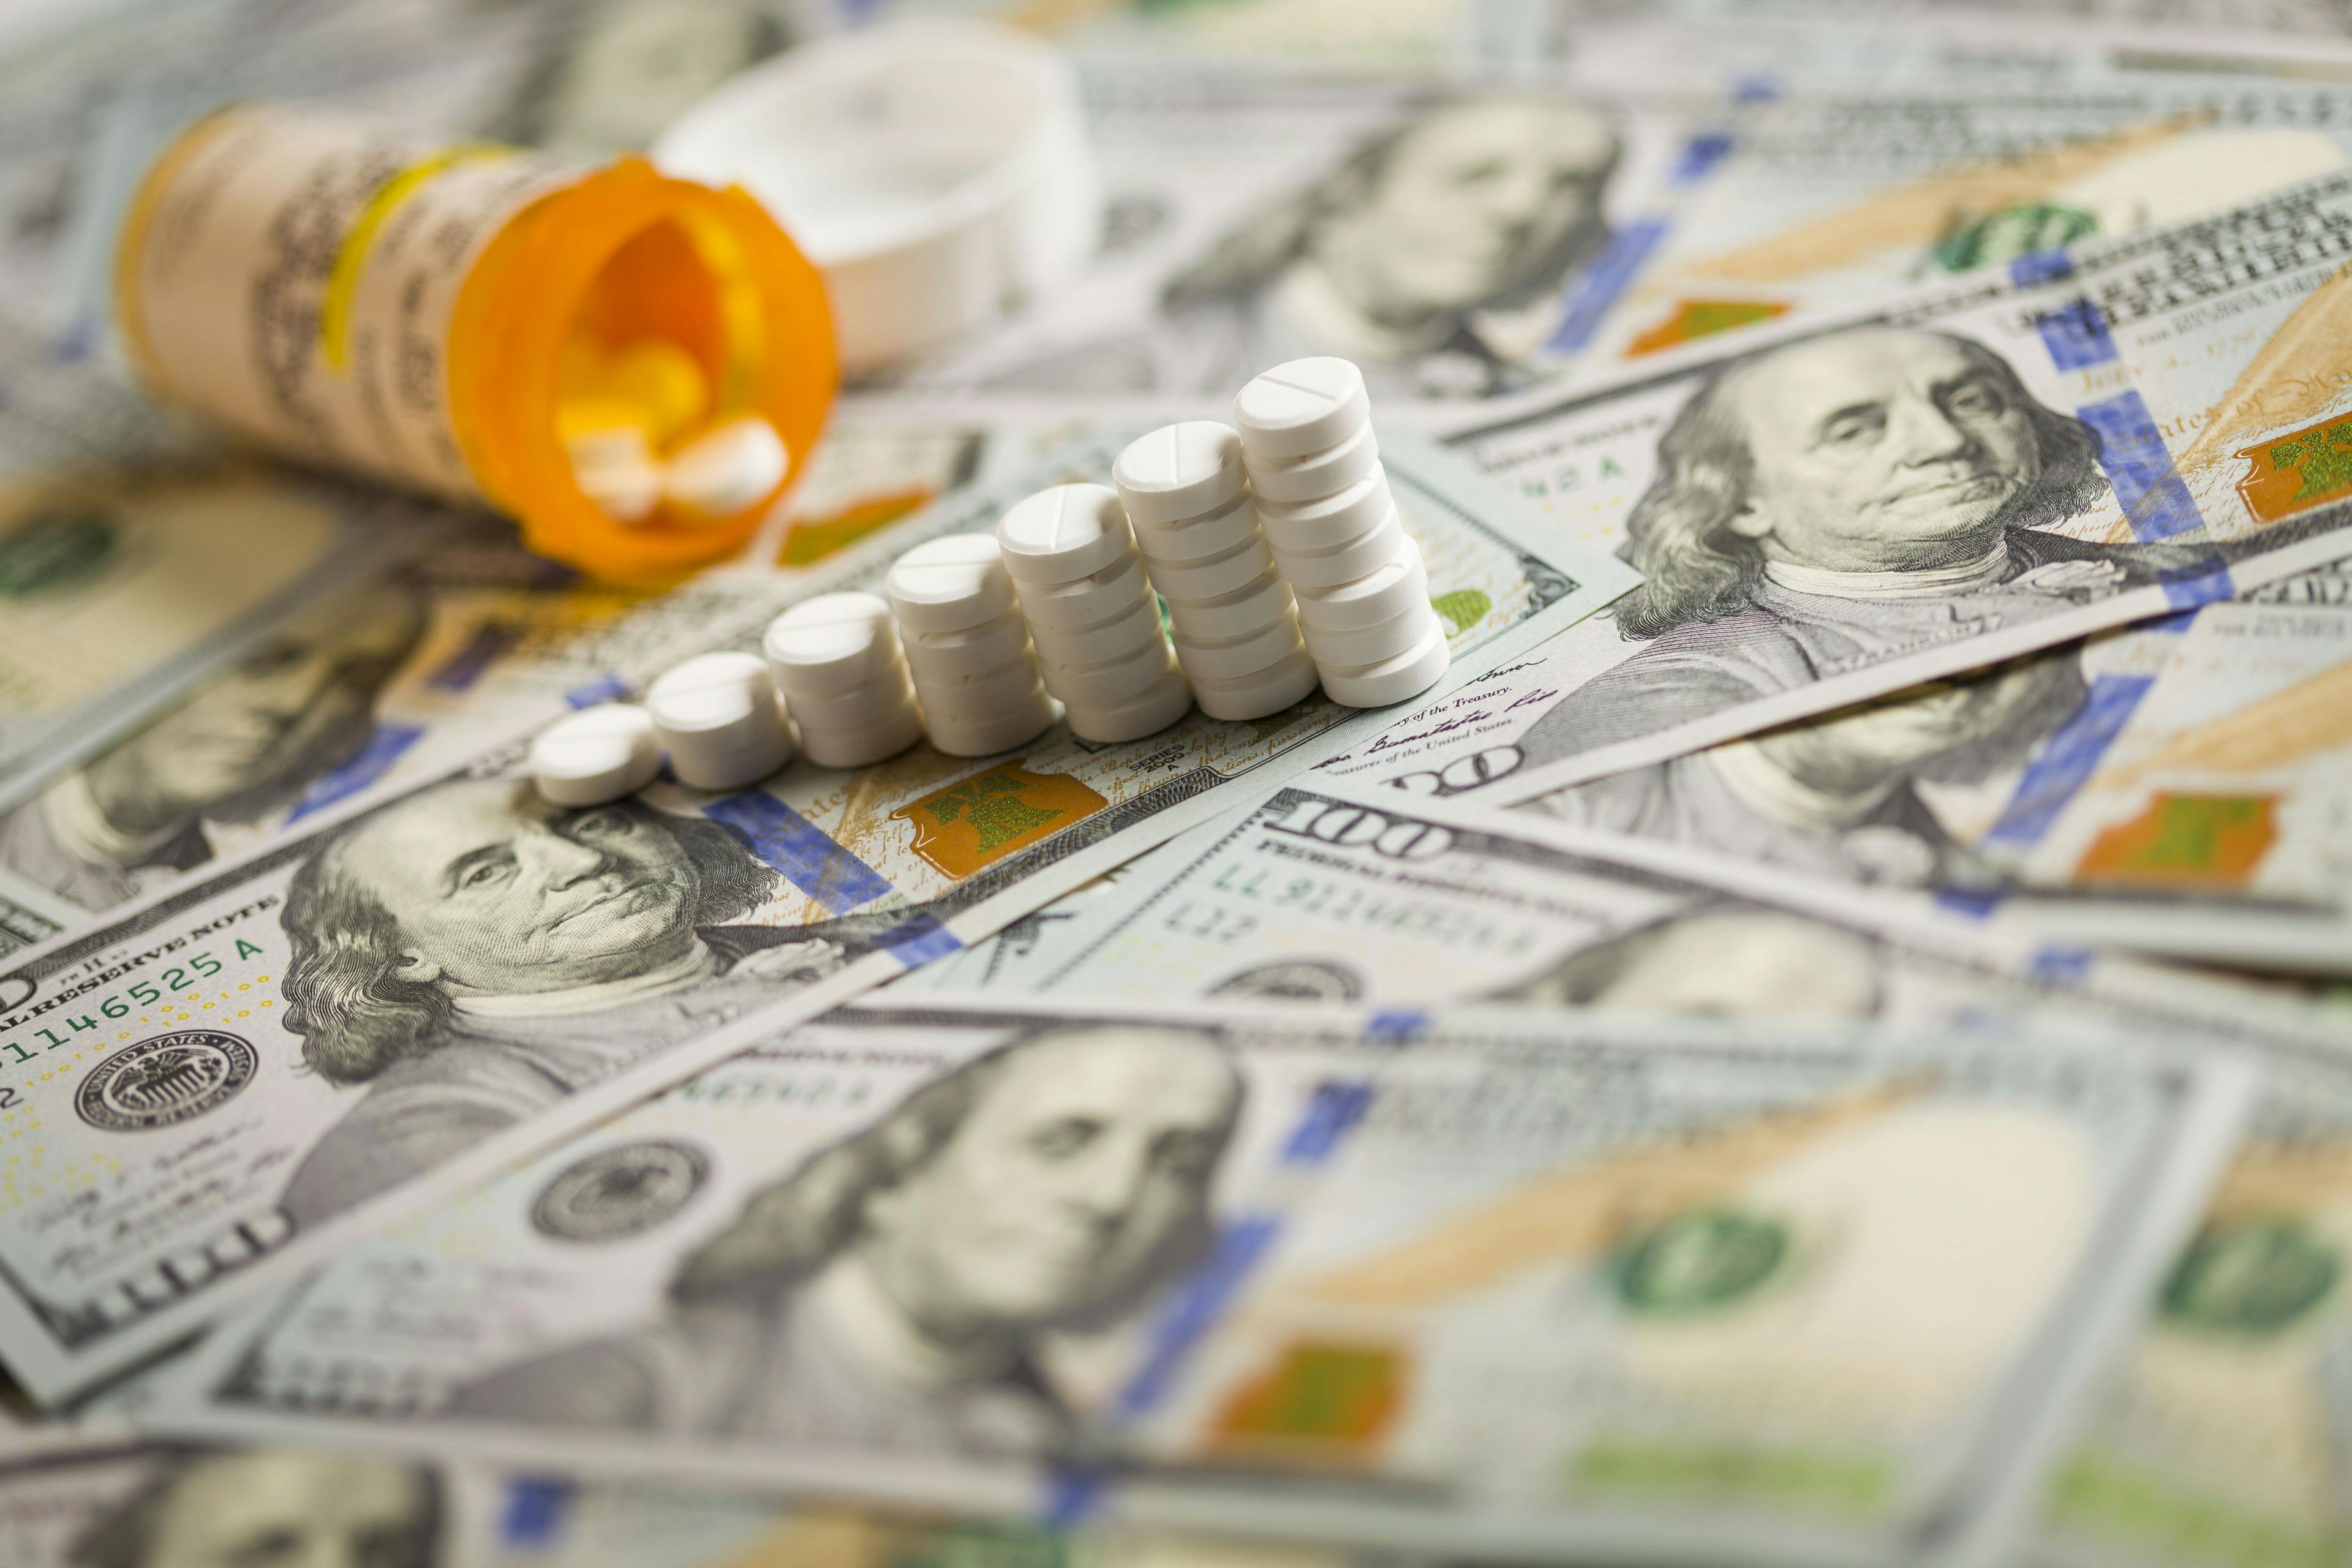 Patients Often Lose in the Battle Between Pharmaceutical Companies and PBMs